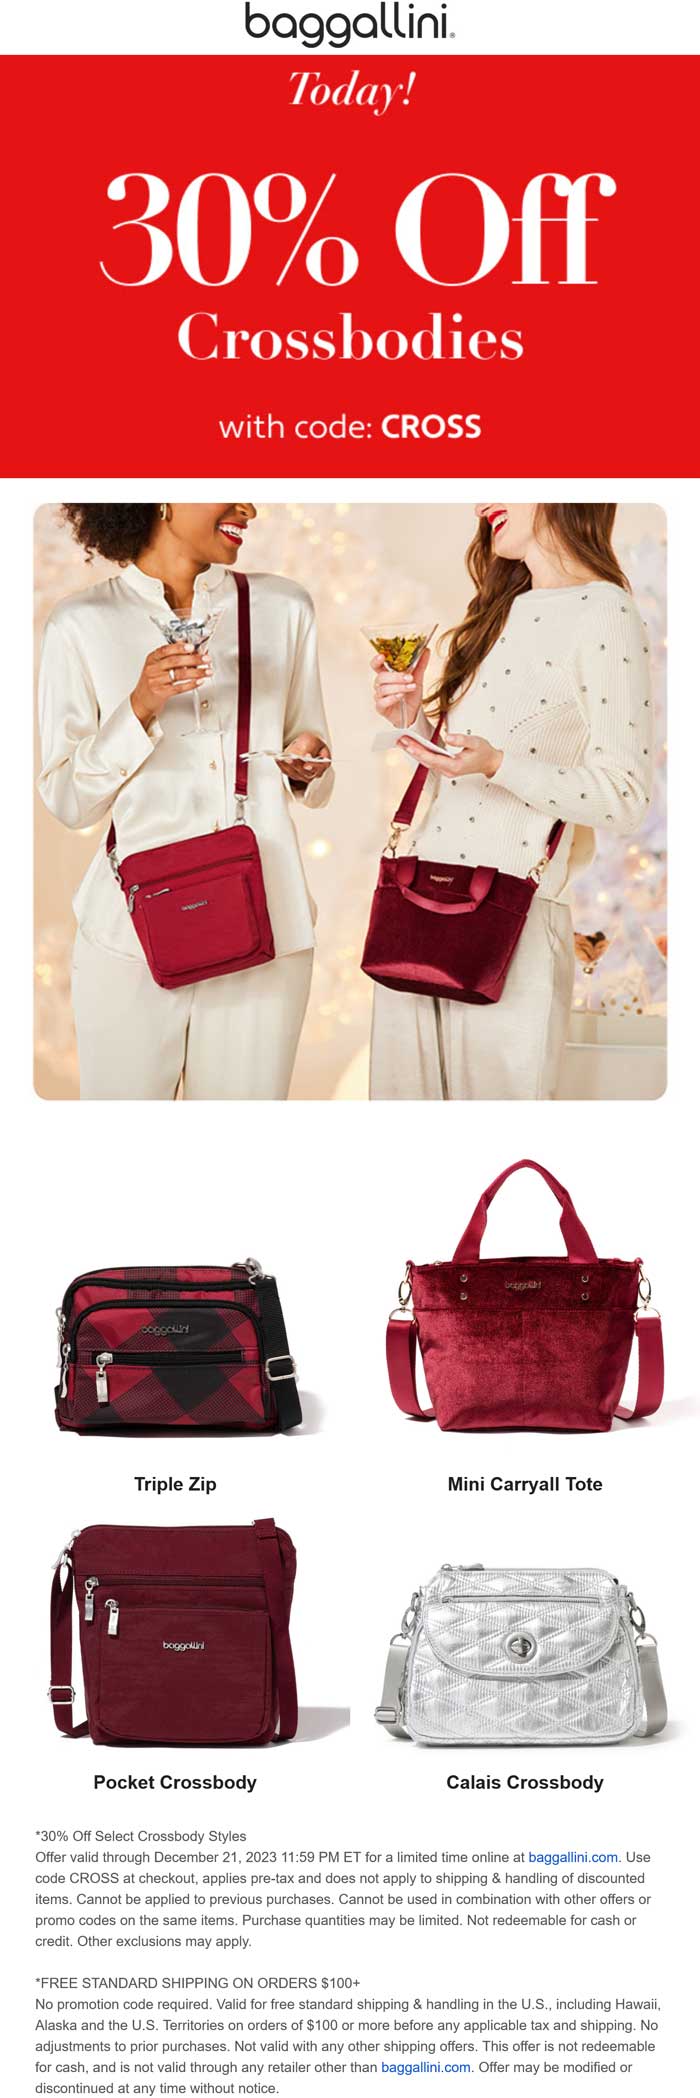 Baggallini stores Coupon  30% off crossbody styles at Baggallini via promo code CROSS #baggallini 